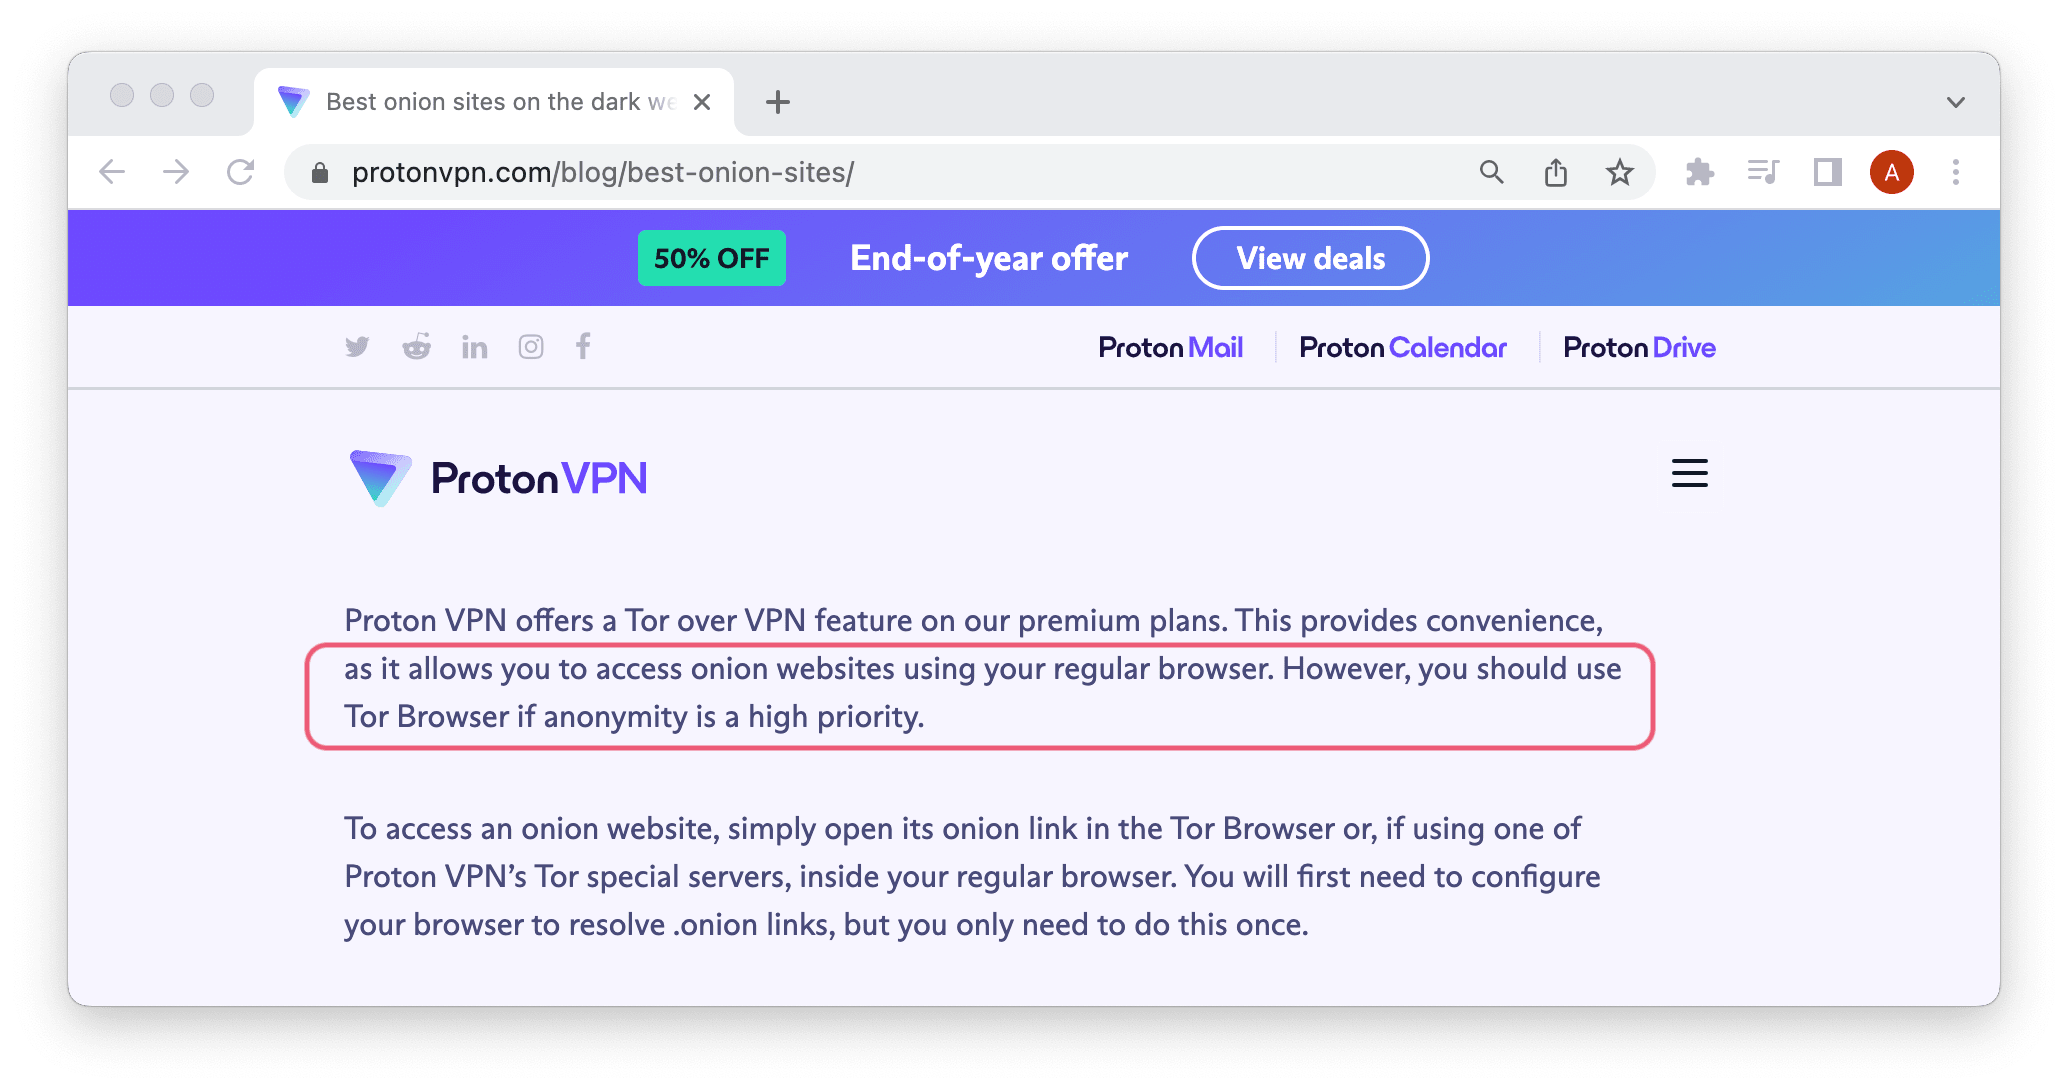 Proton VPN openly shares that a normal browser (and its Tor over VPN server) is no match for the Tor browser in terms of anonymity. 